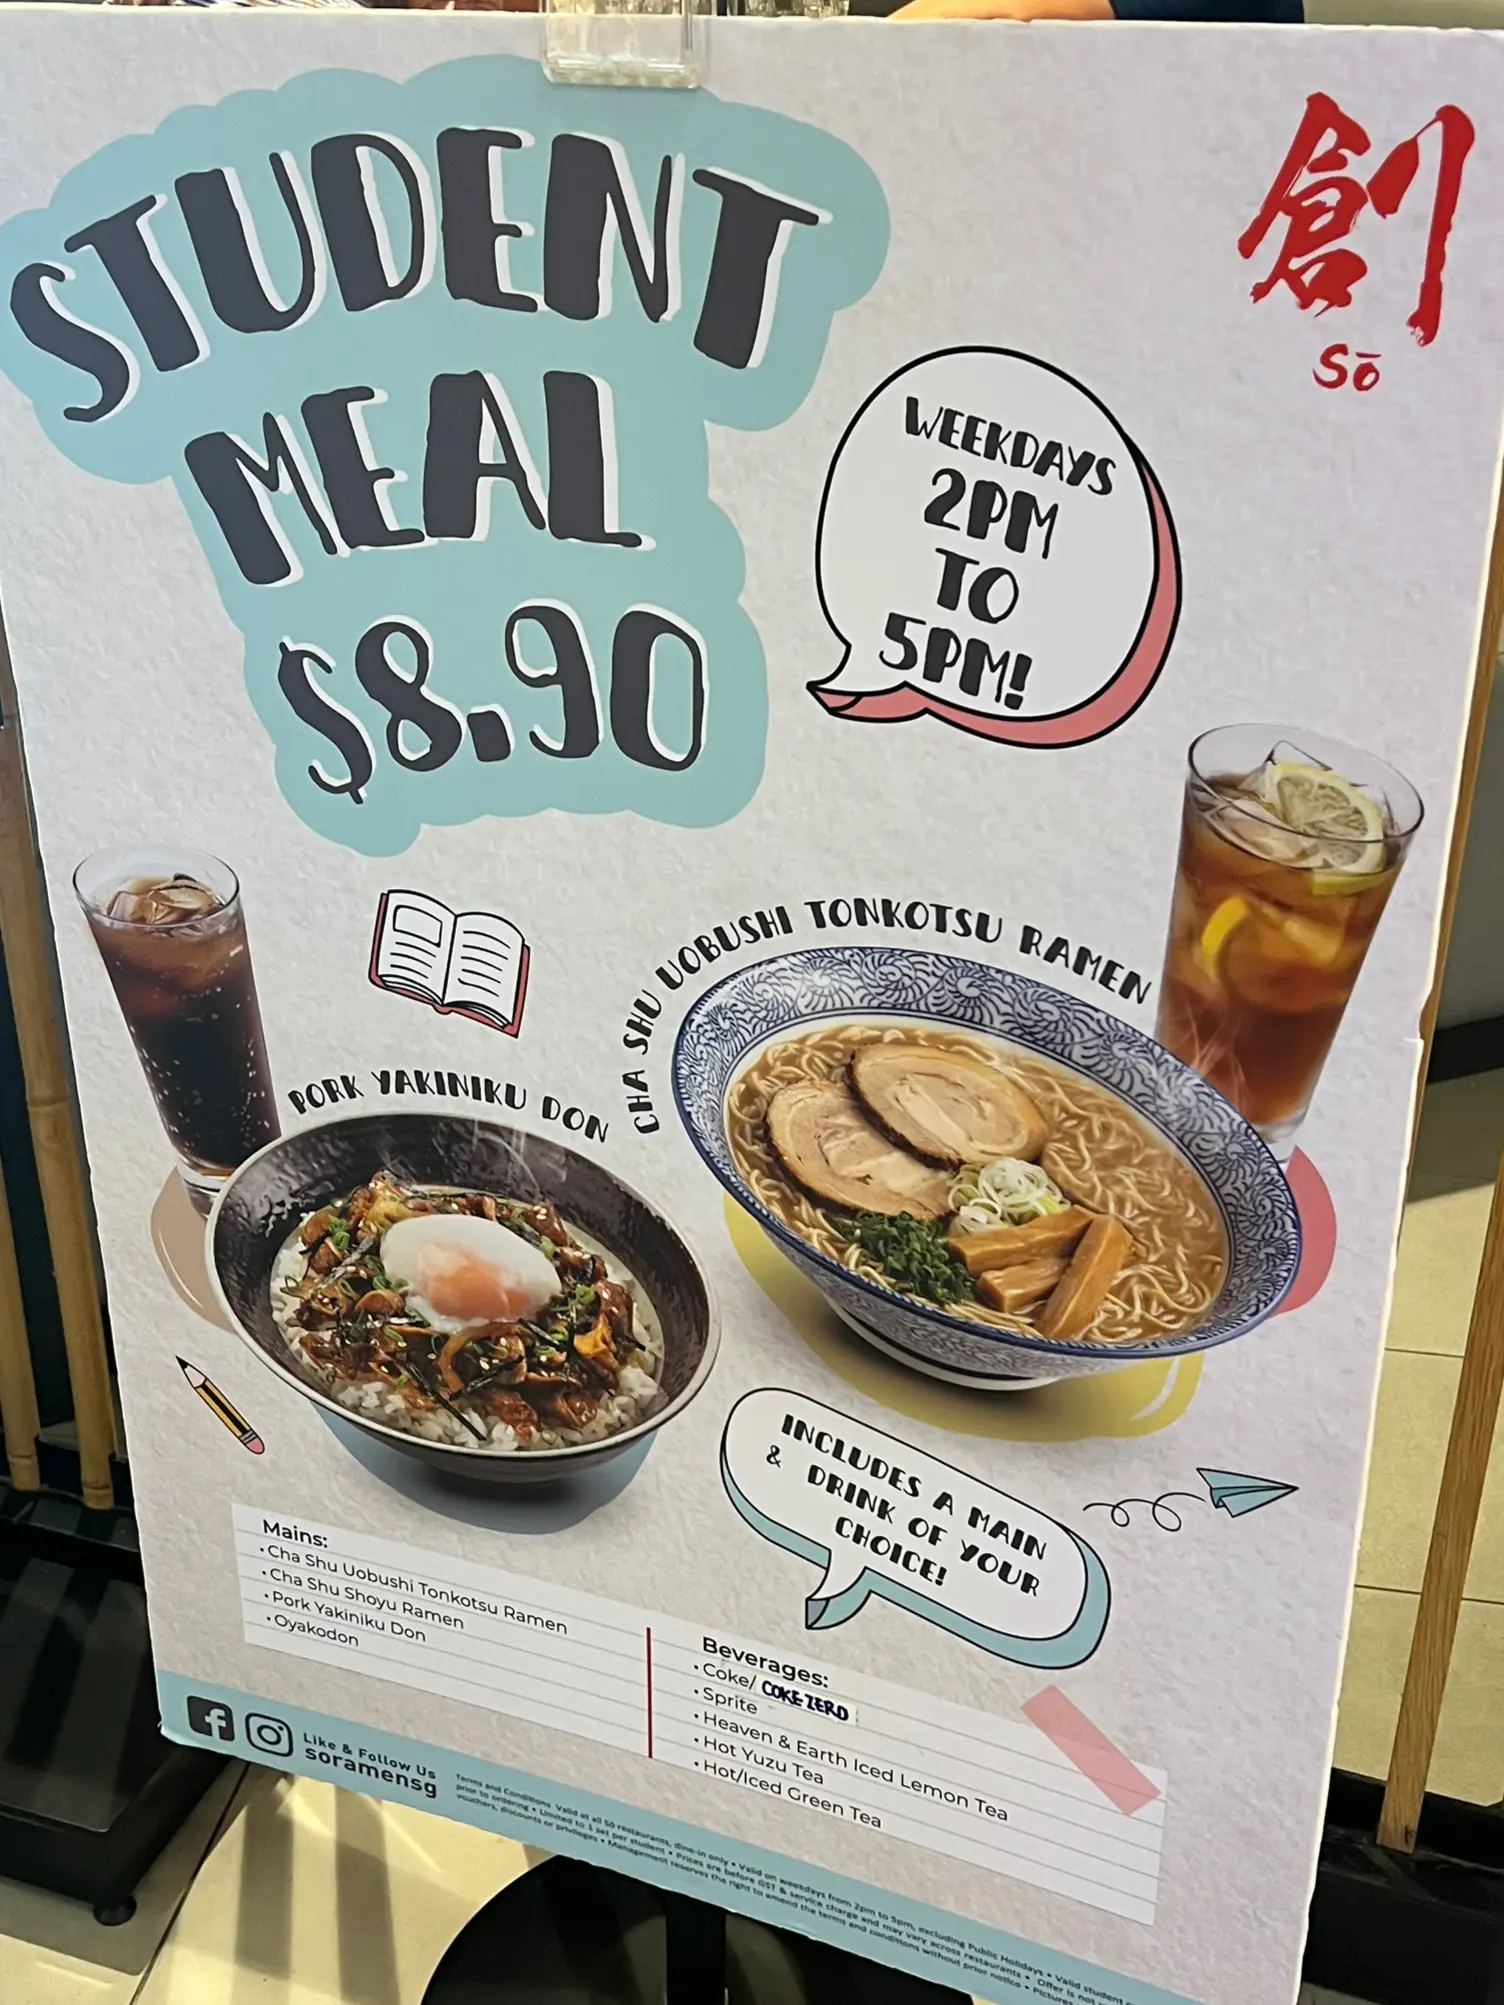 Set Meals for Students below $10's images(3)